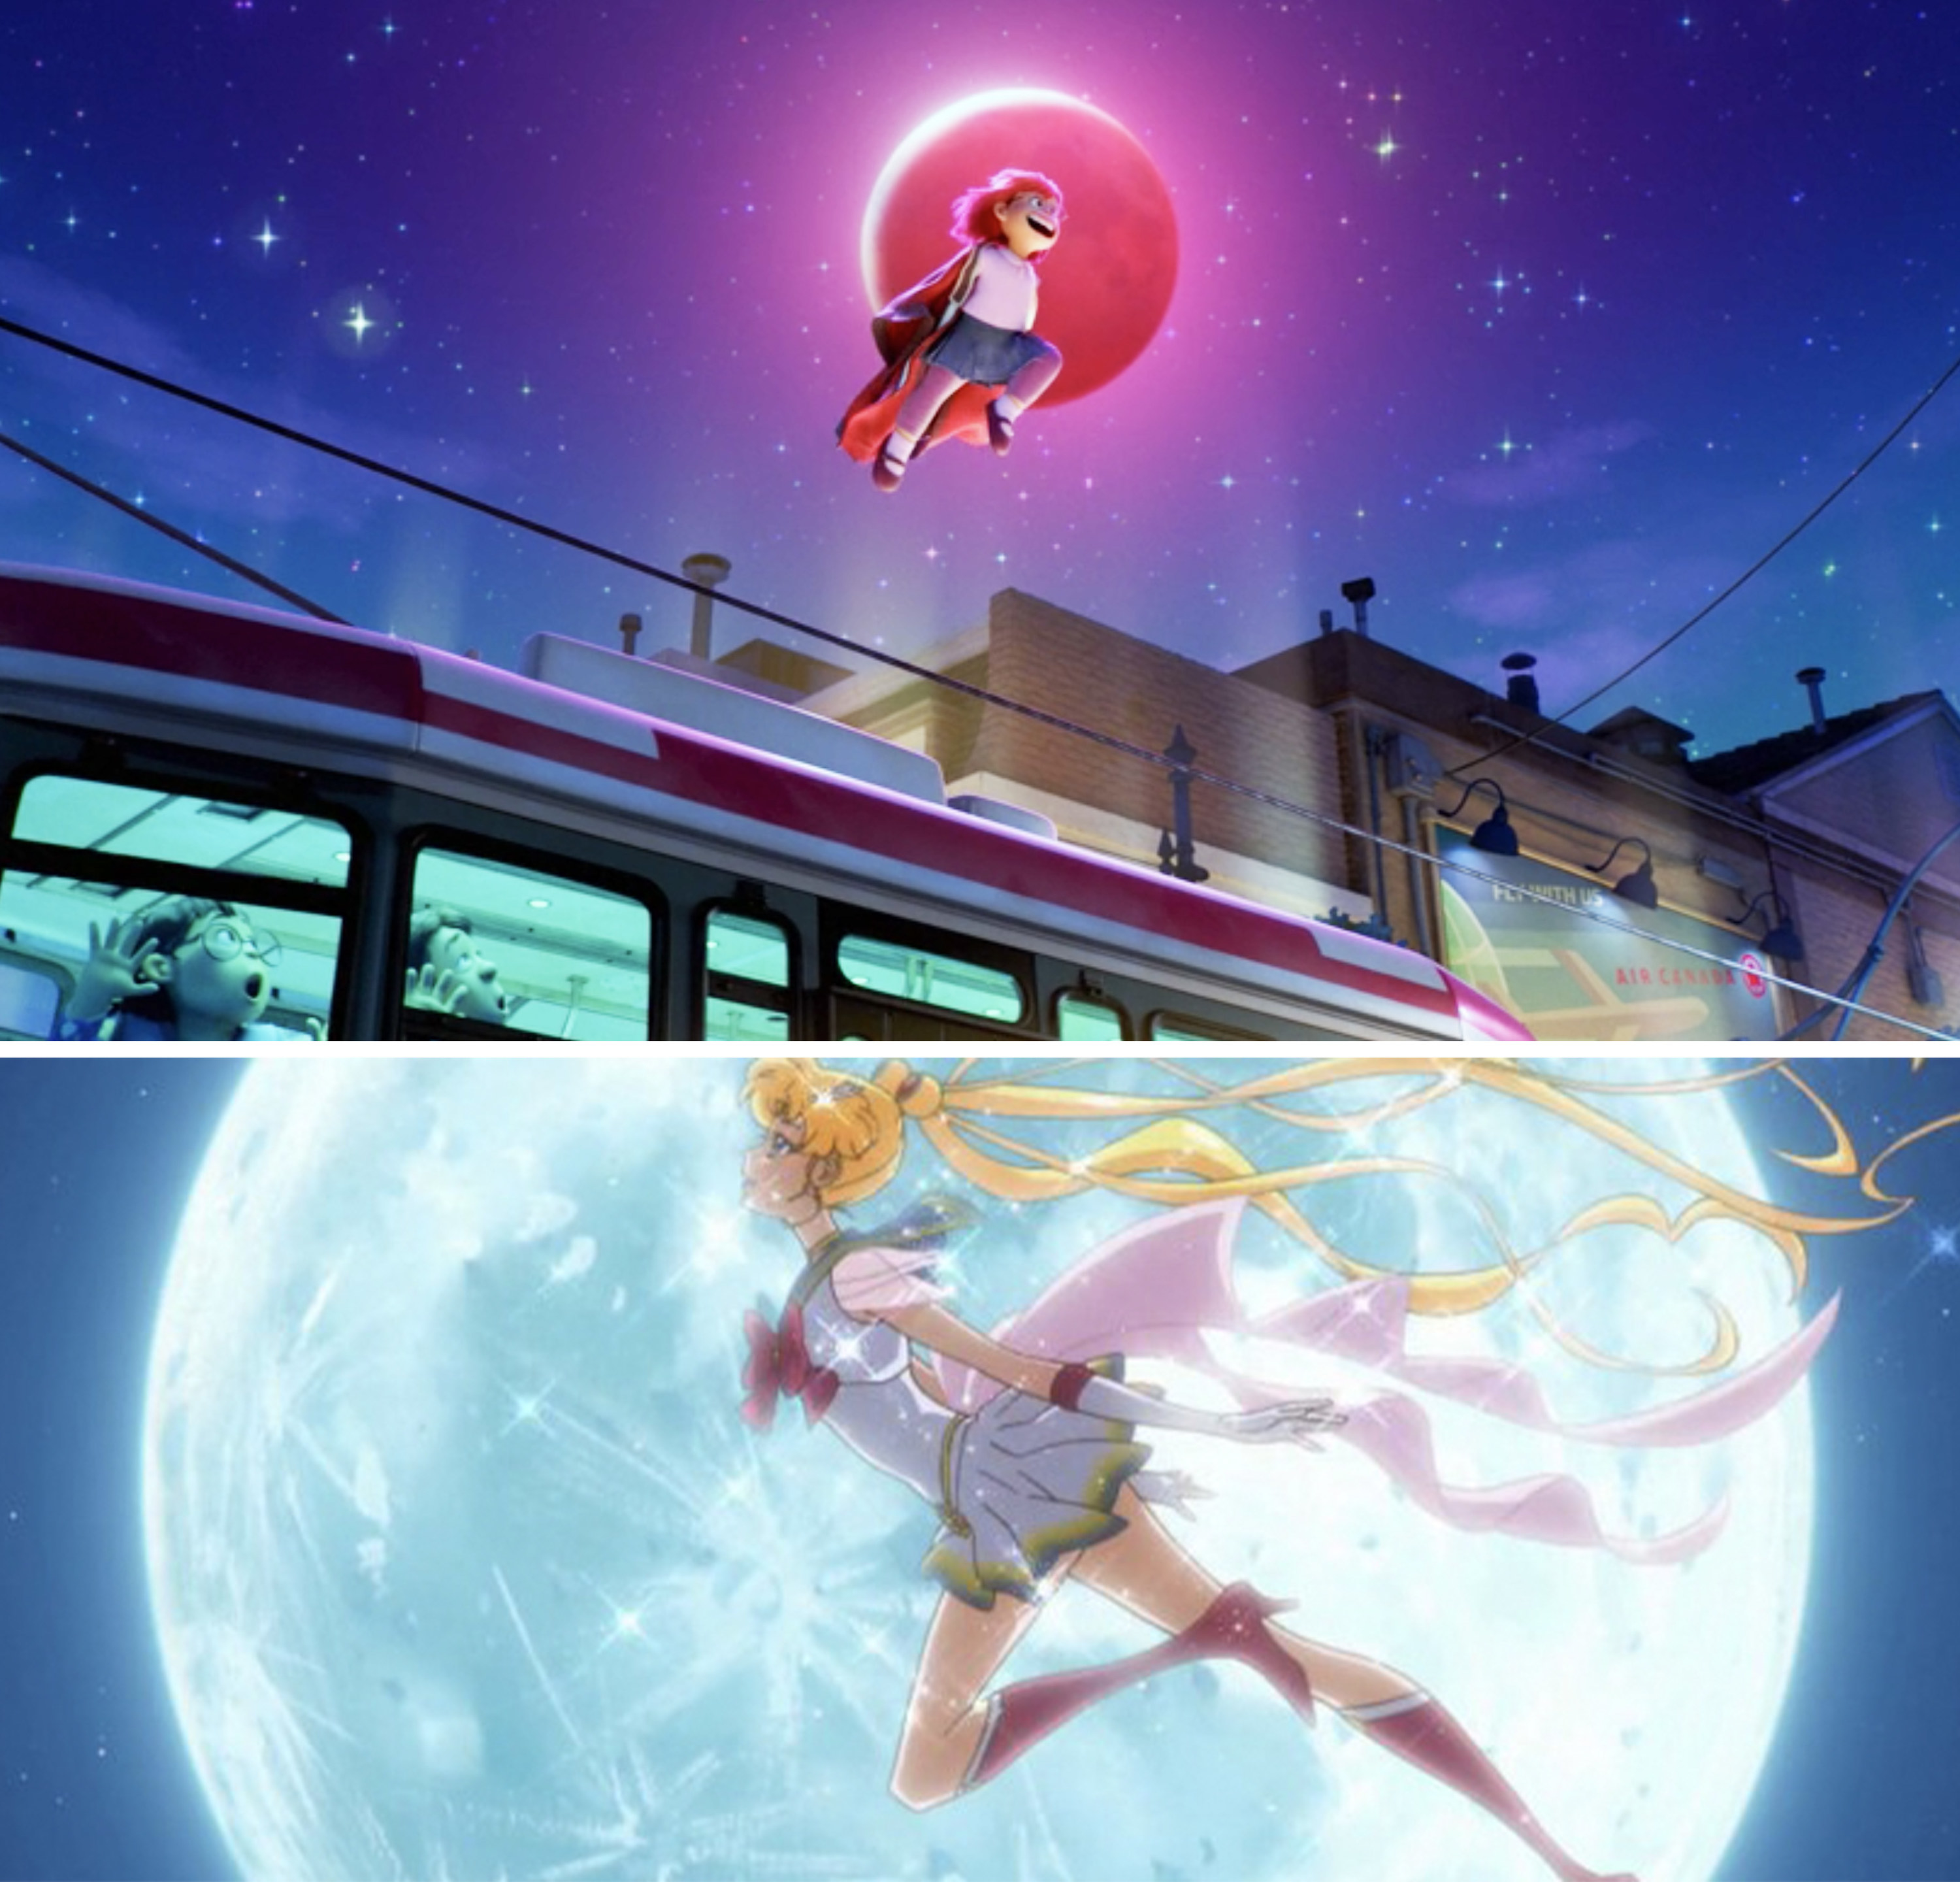 Mei being silhouetted by the moon vs. Sailor Moon